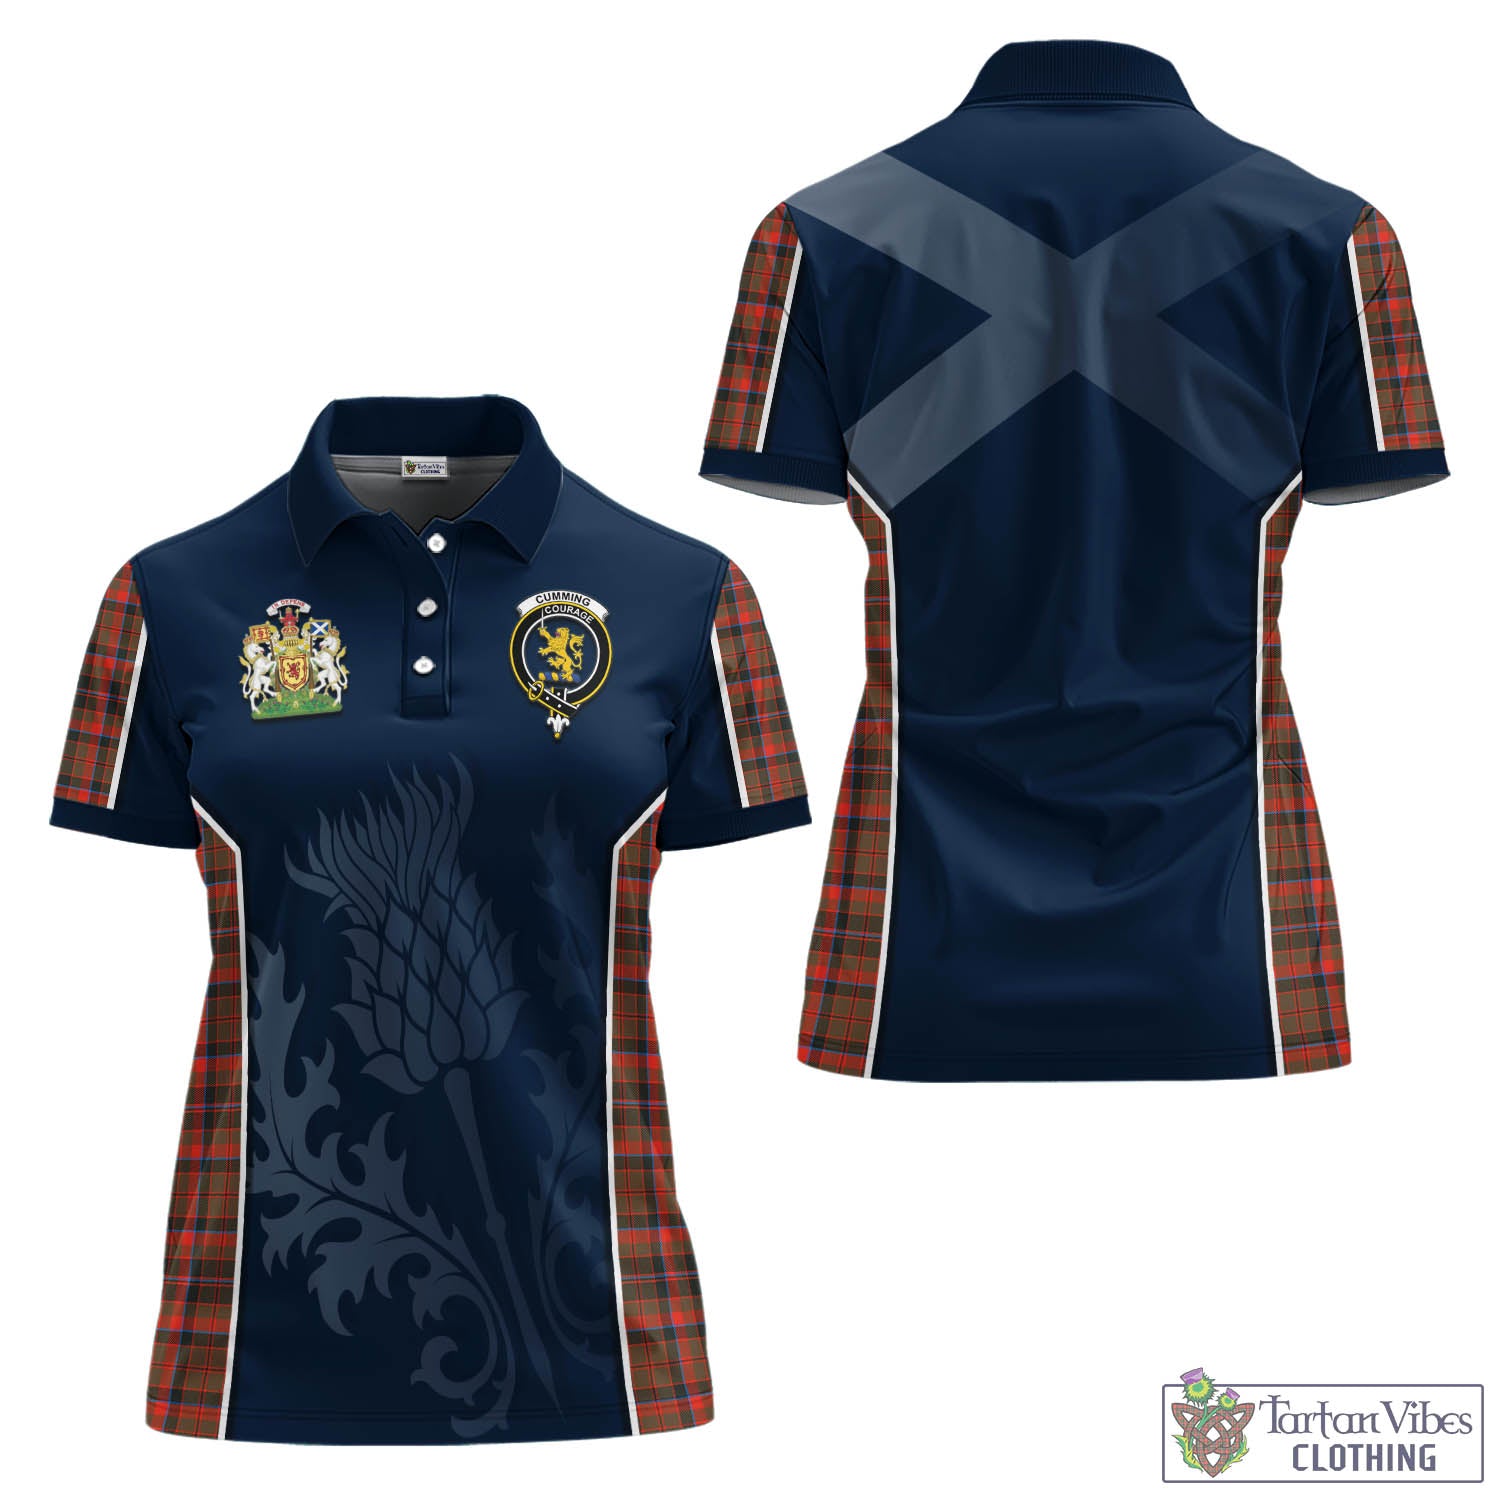 Tartan Vibes Clothing Cumming Hunting Weathered Tartan Women's Polo Shirt with Family Crest and Scottish Thistle Vibes Sport Style